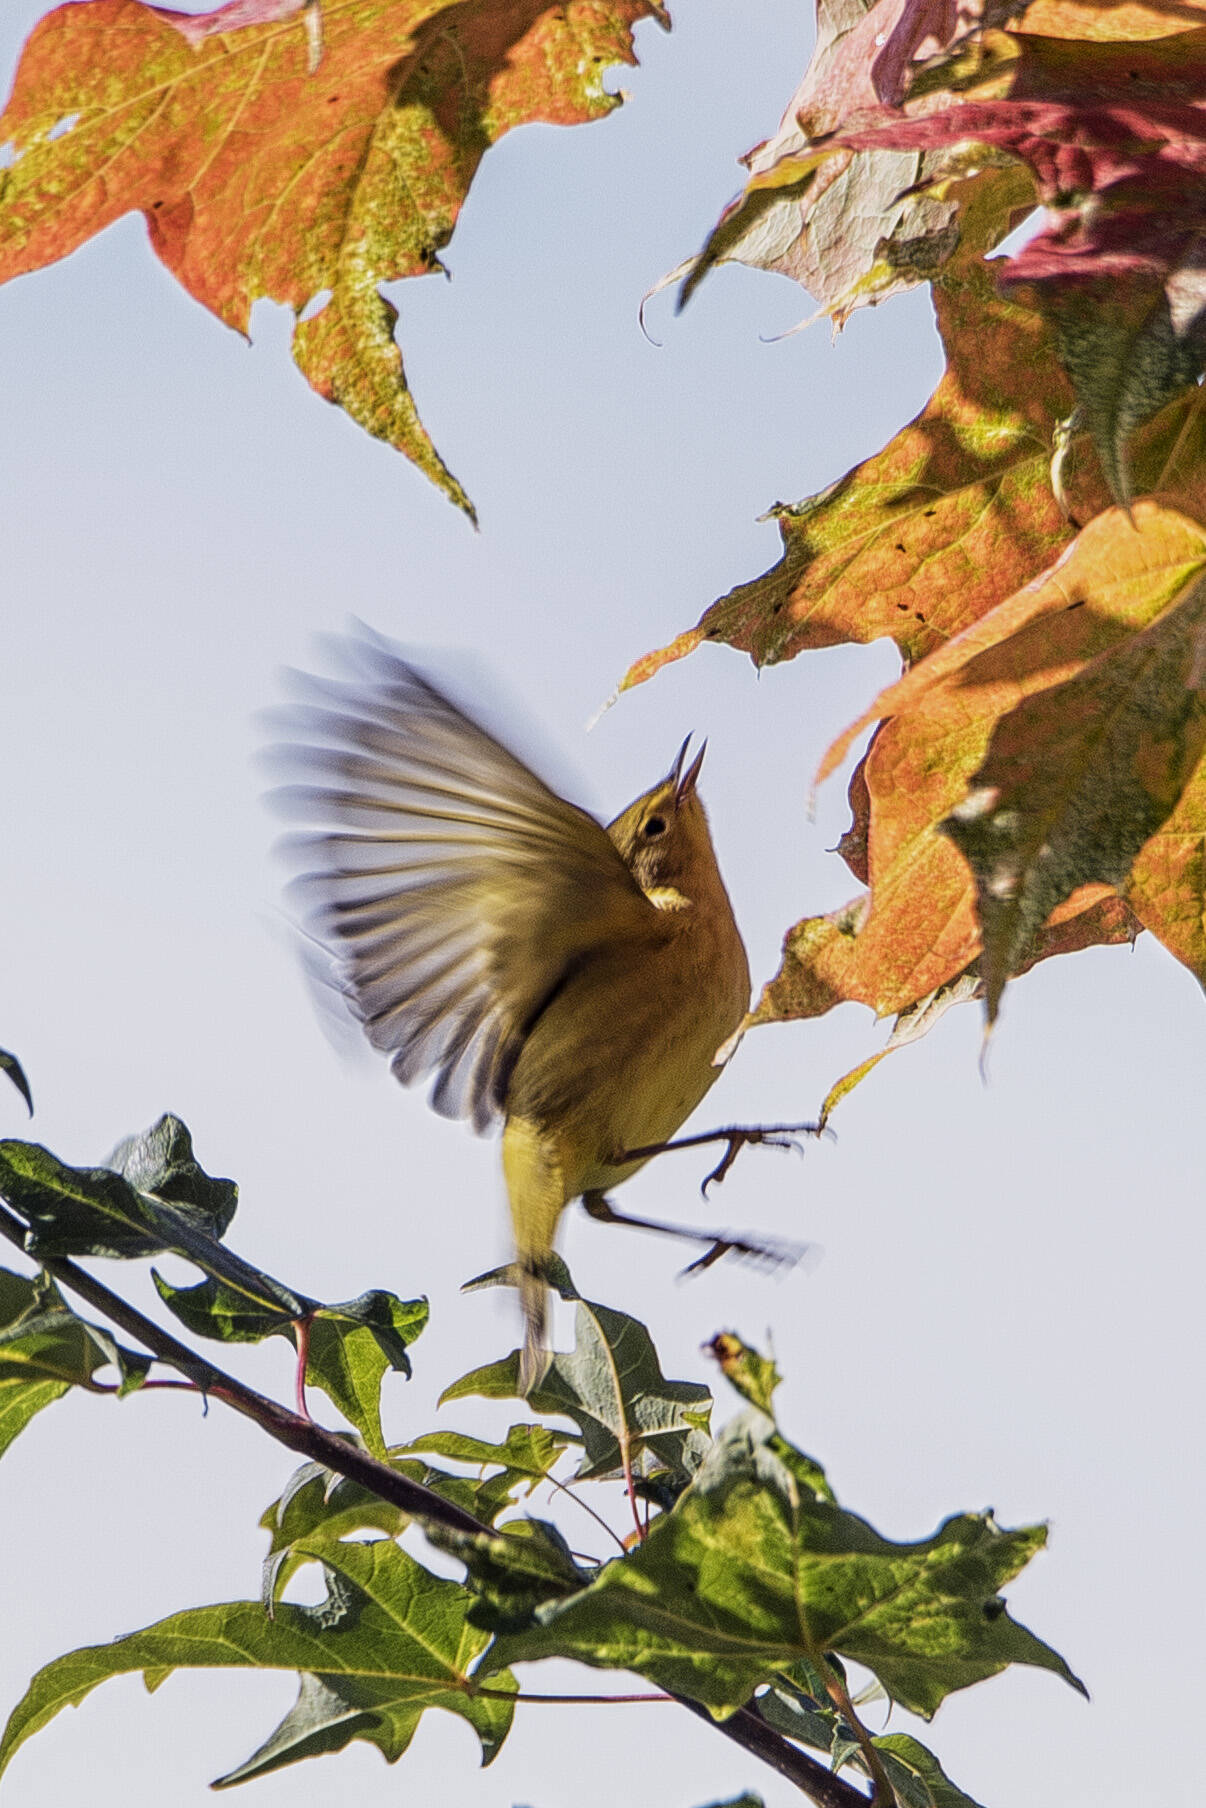 A yellow warbler feeds on insects amongst golden maple tree Out the Road. (Courtesy Photo / Kenneth Gill, gillfoto)